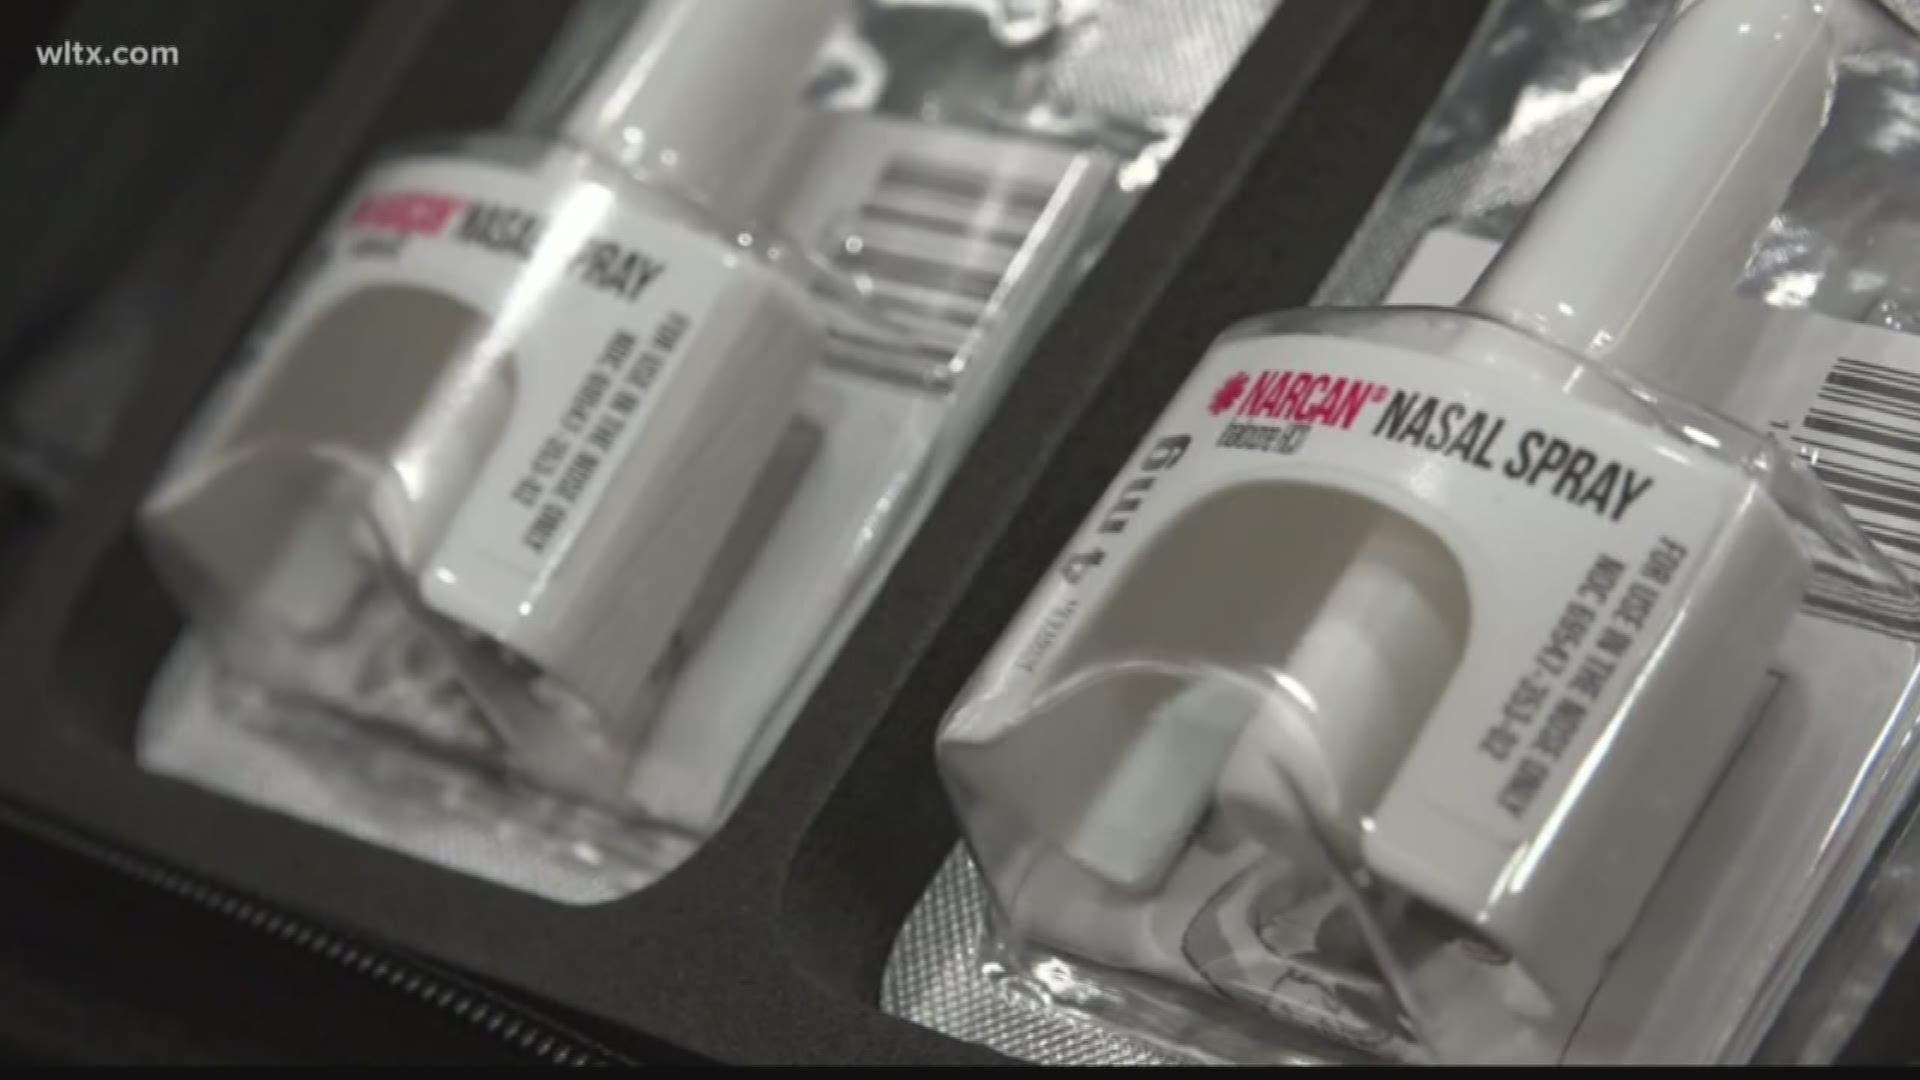 Its part of an effort to fight the increasing dangers associated with opioid drug use.